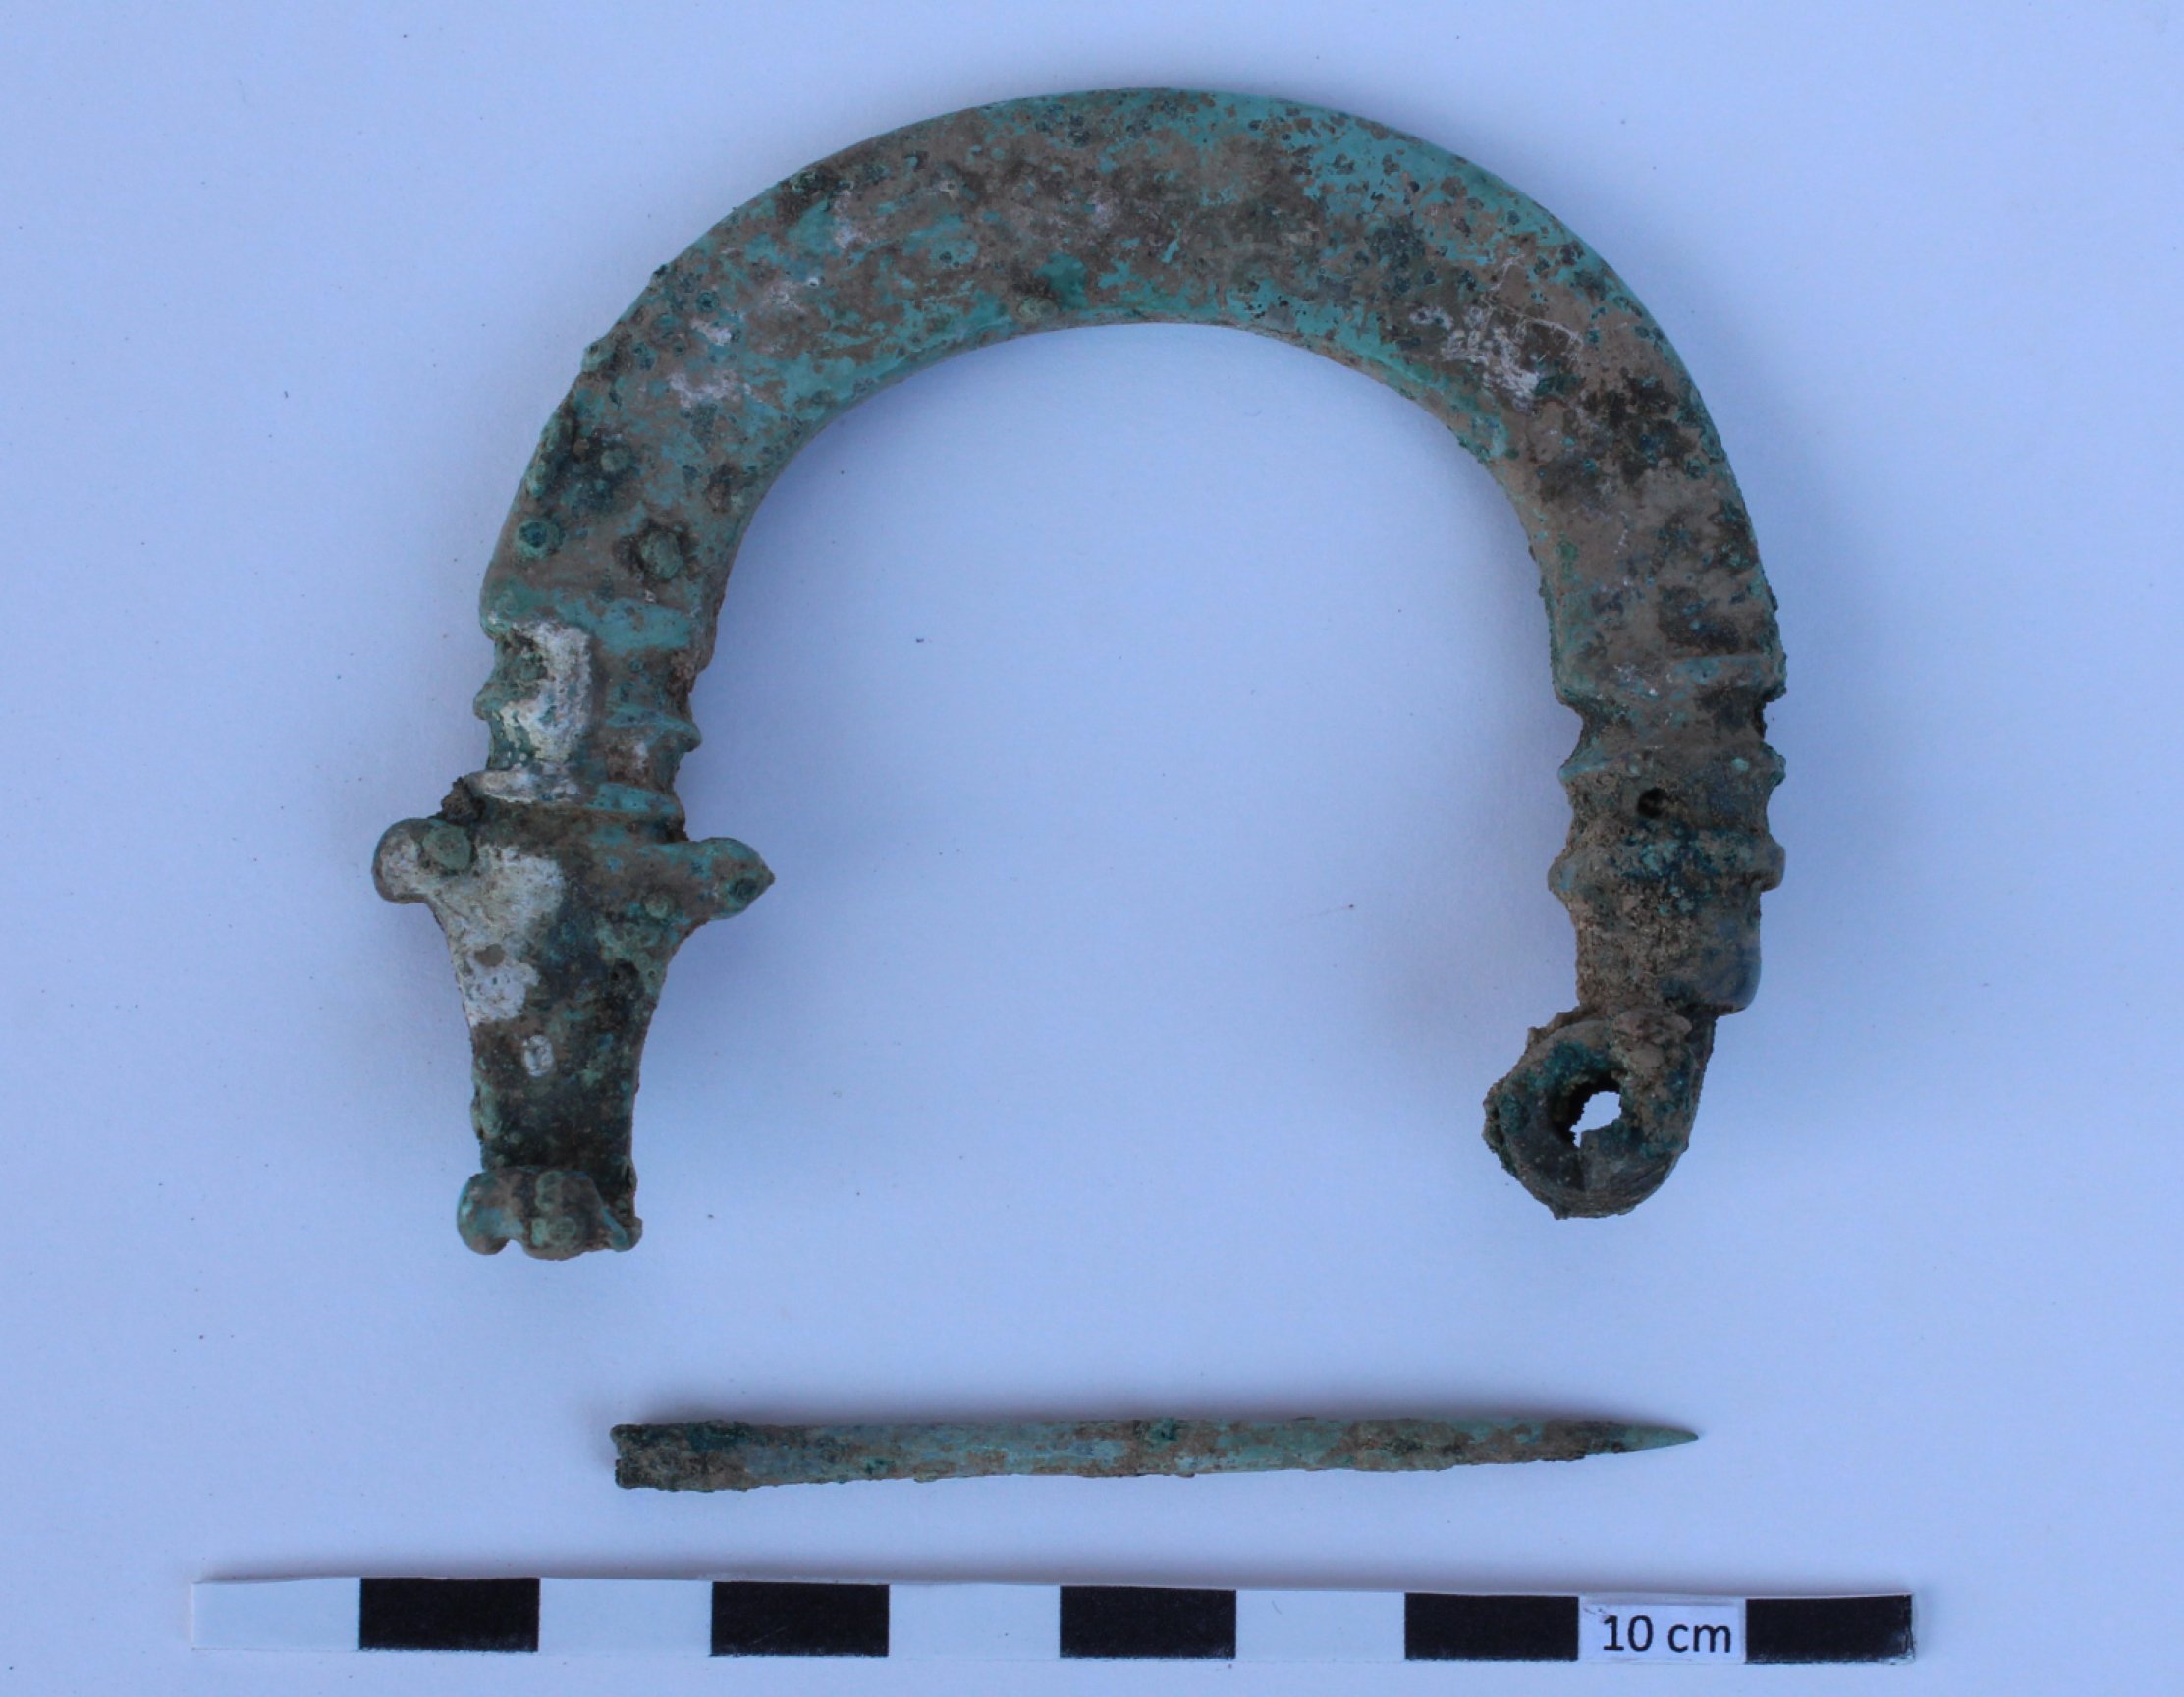 As the dress needle known as 'fibula' belongs to the archaic period, it revealed that civilizations in the Lower City had been established much earlier. (AA PHOTO)